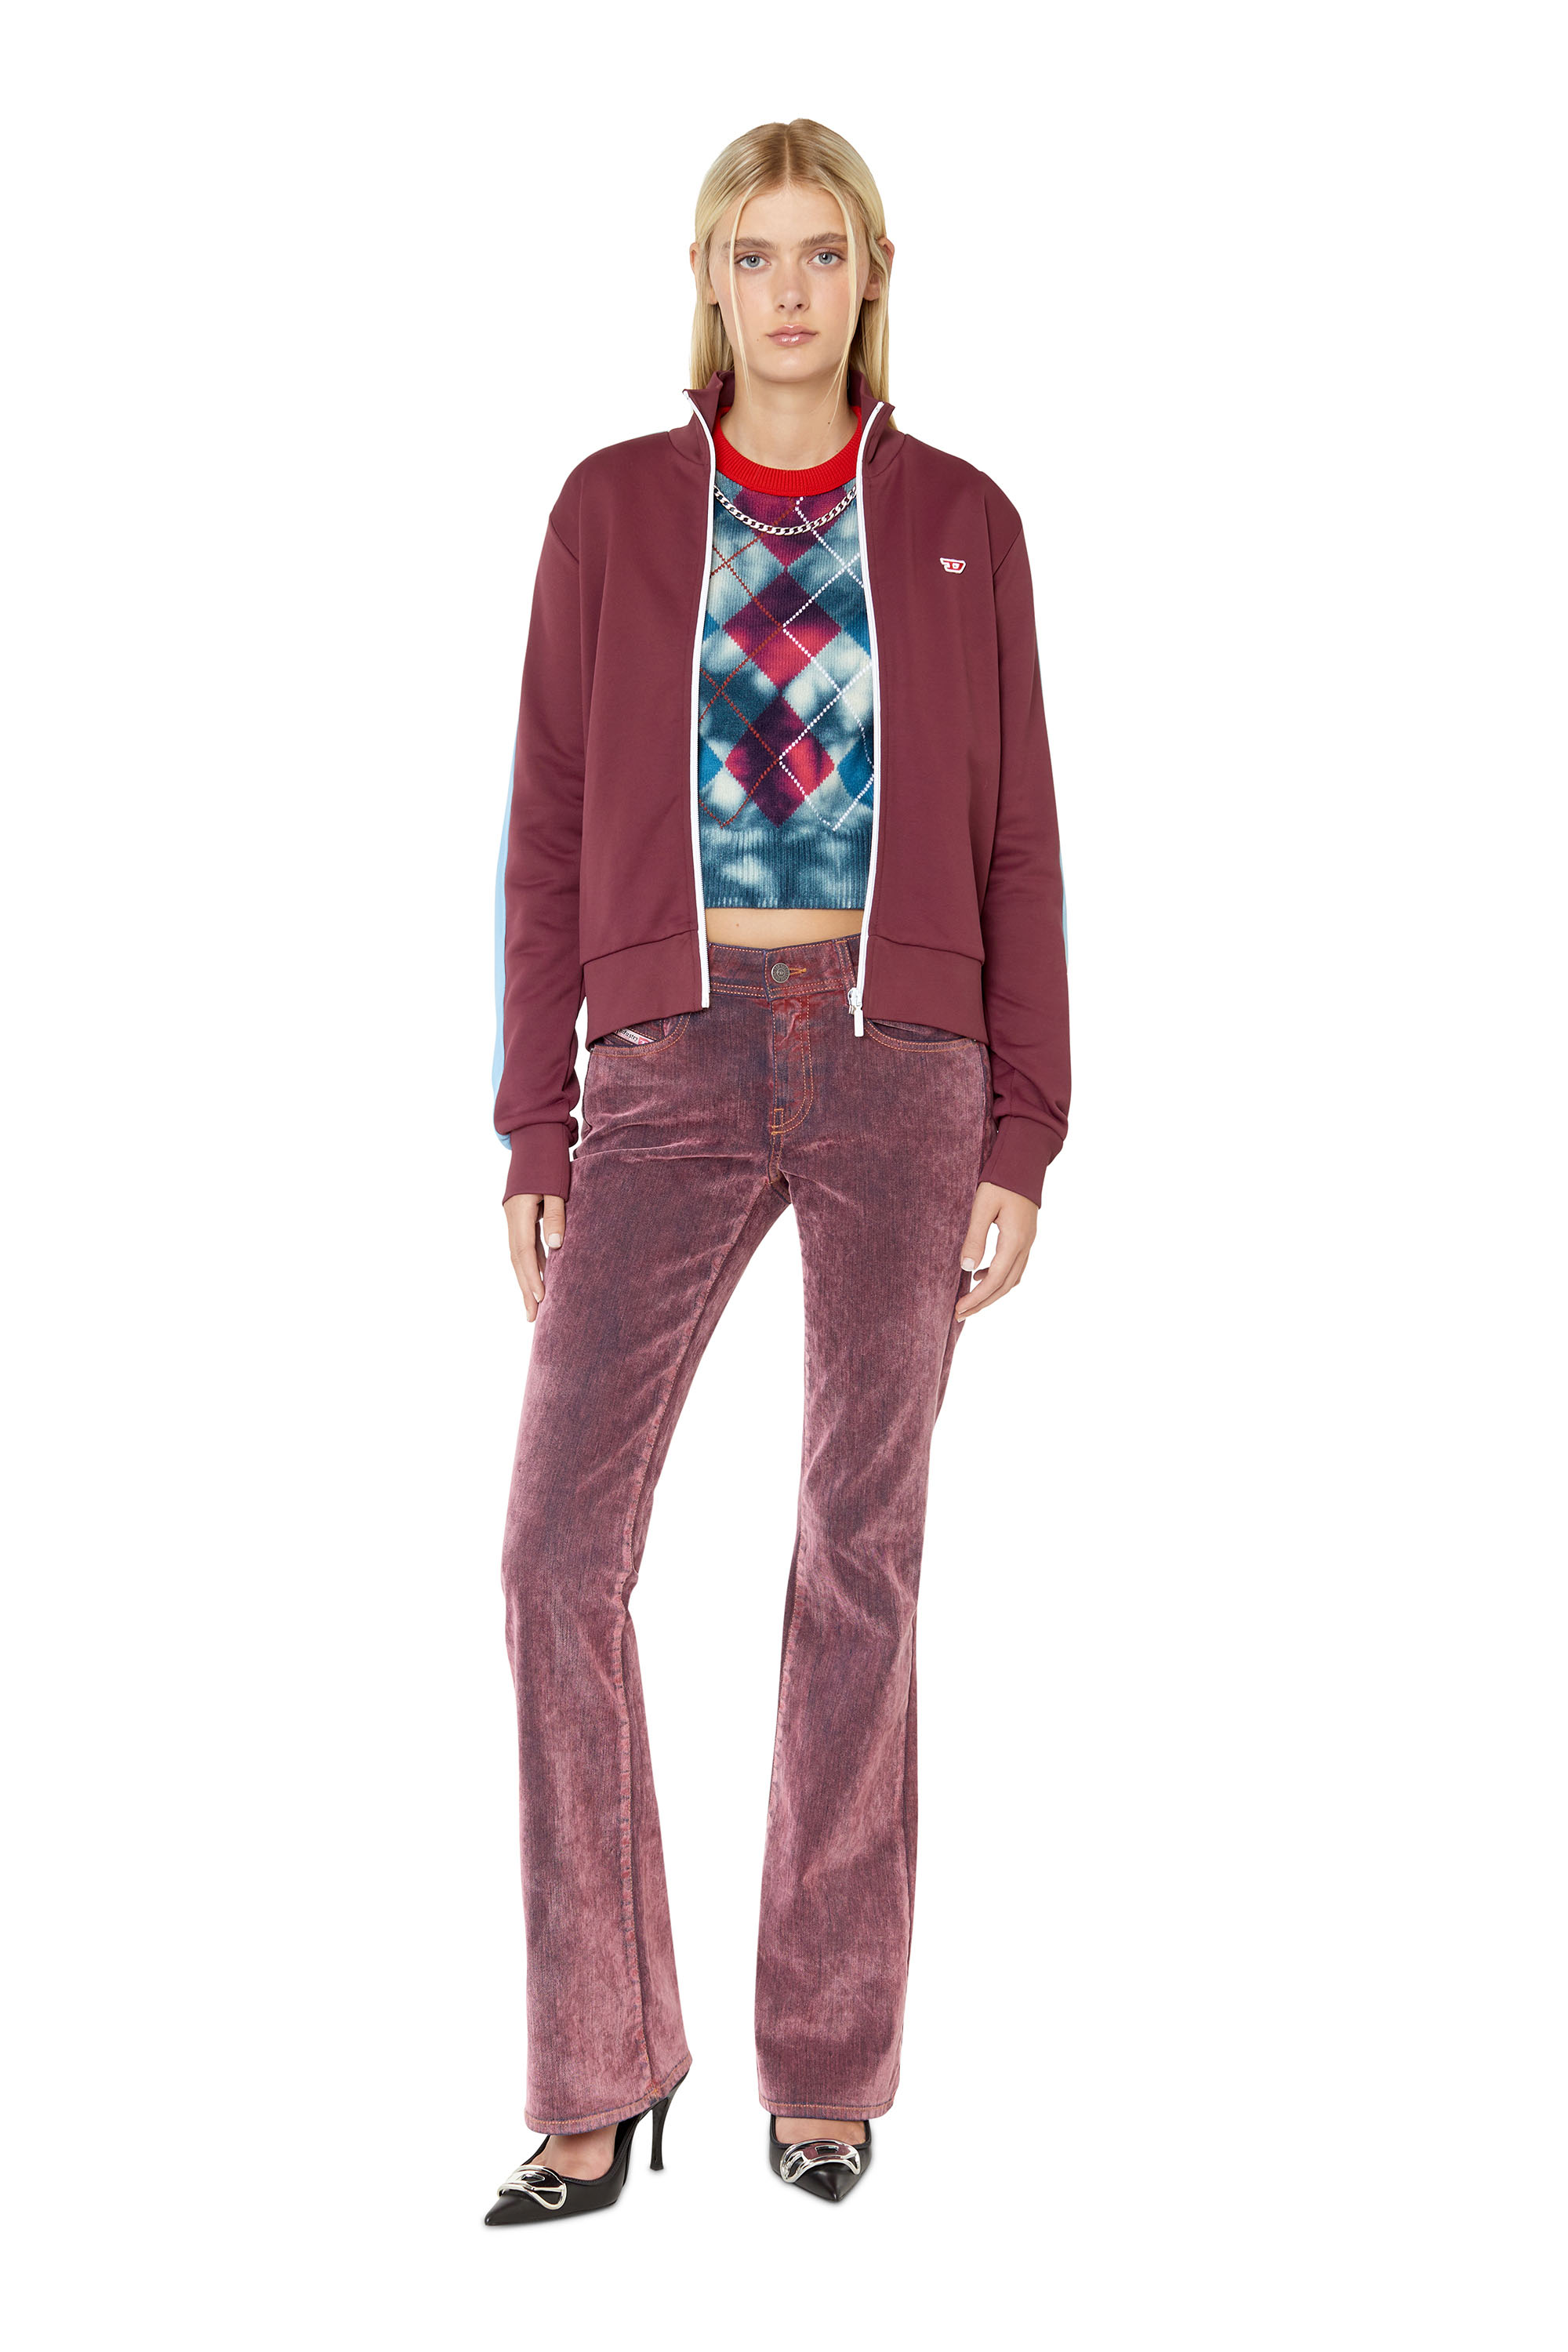 Diesel - 1969 D-EBBEY 0ELAH Bootcut and Flare Jeans, Rose - Image 2